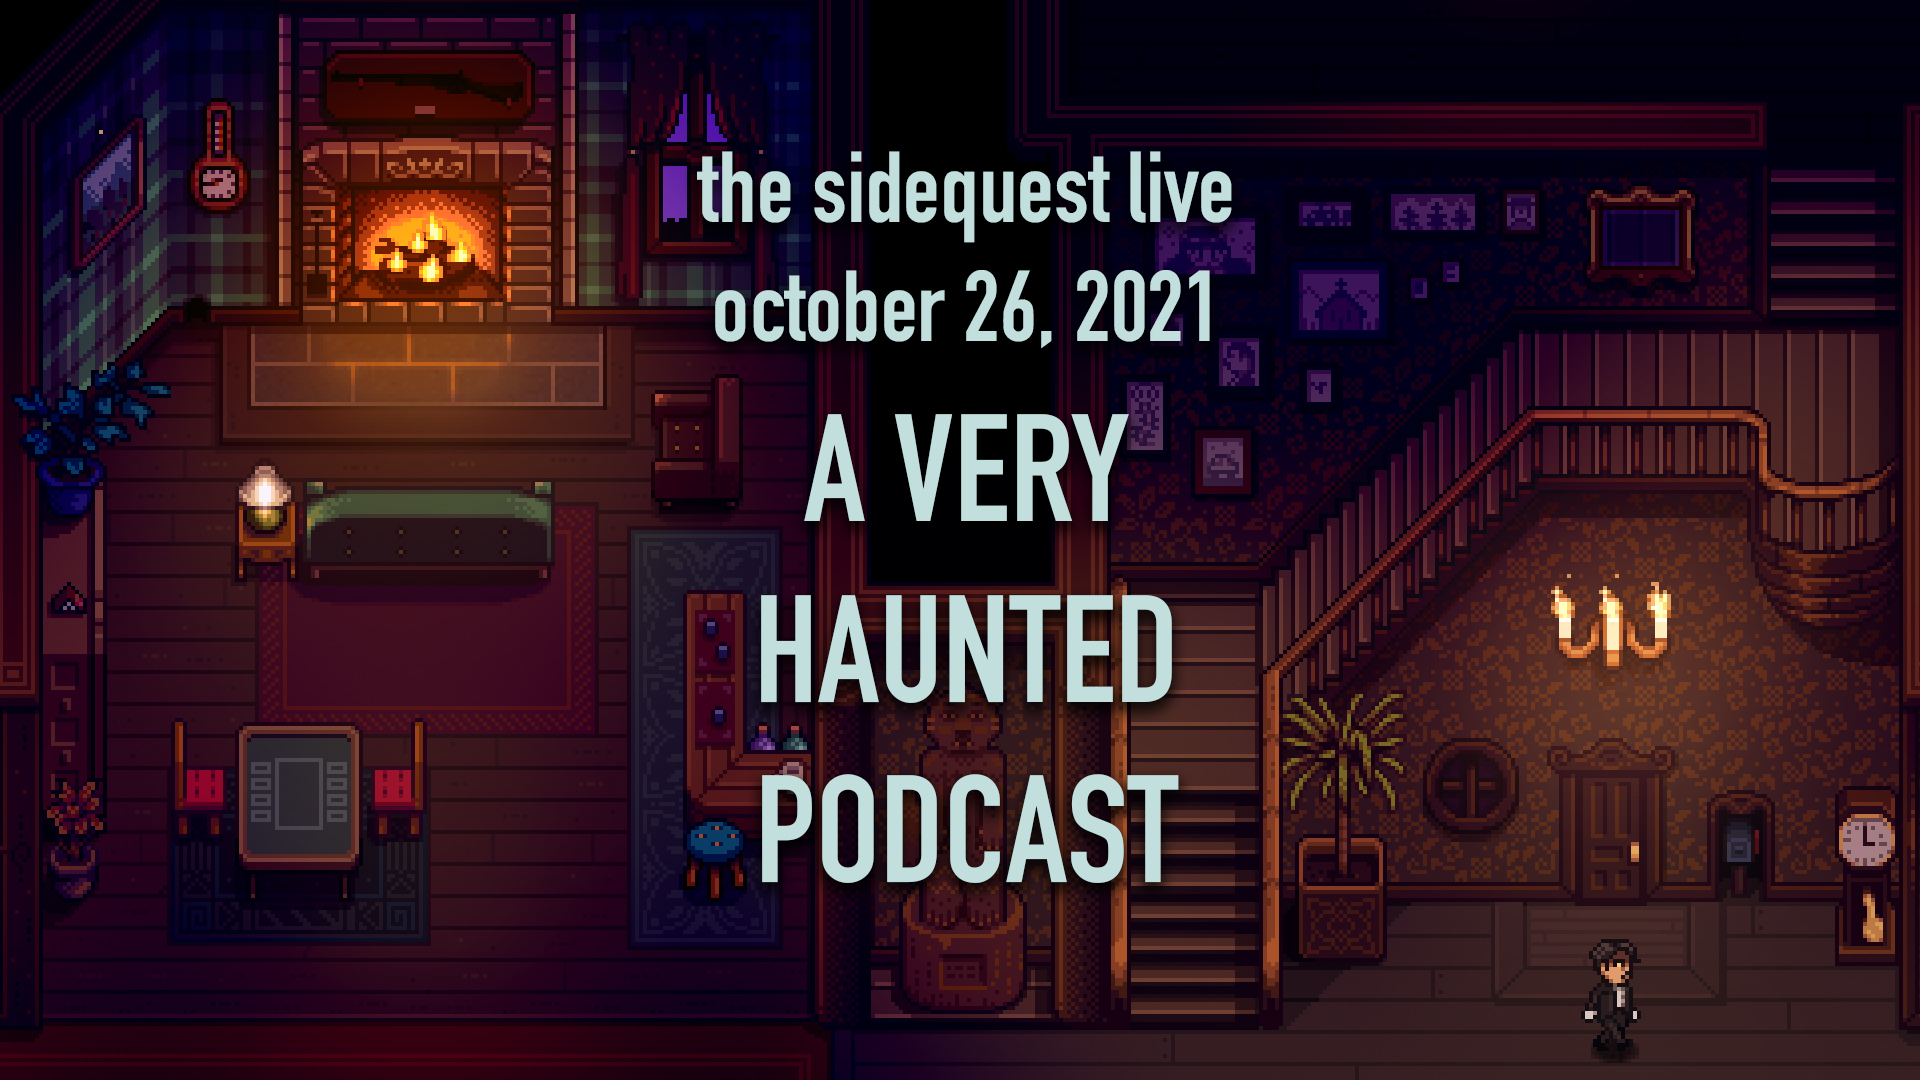 The SideQuest LIVE! October 26, 2021: A VERY HAUNTED PODCAST